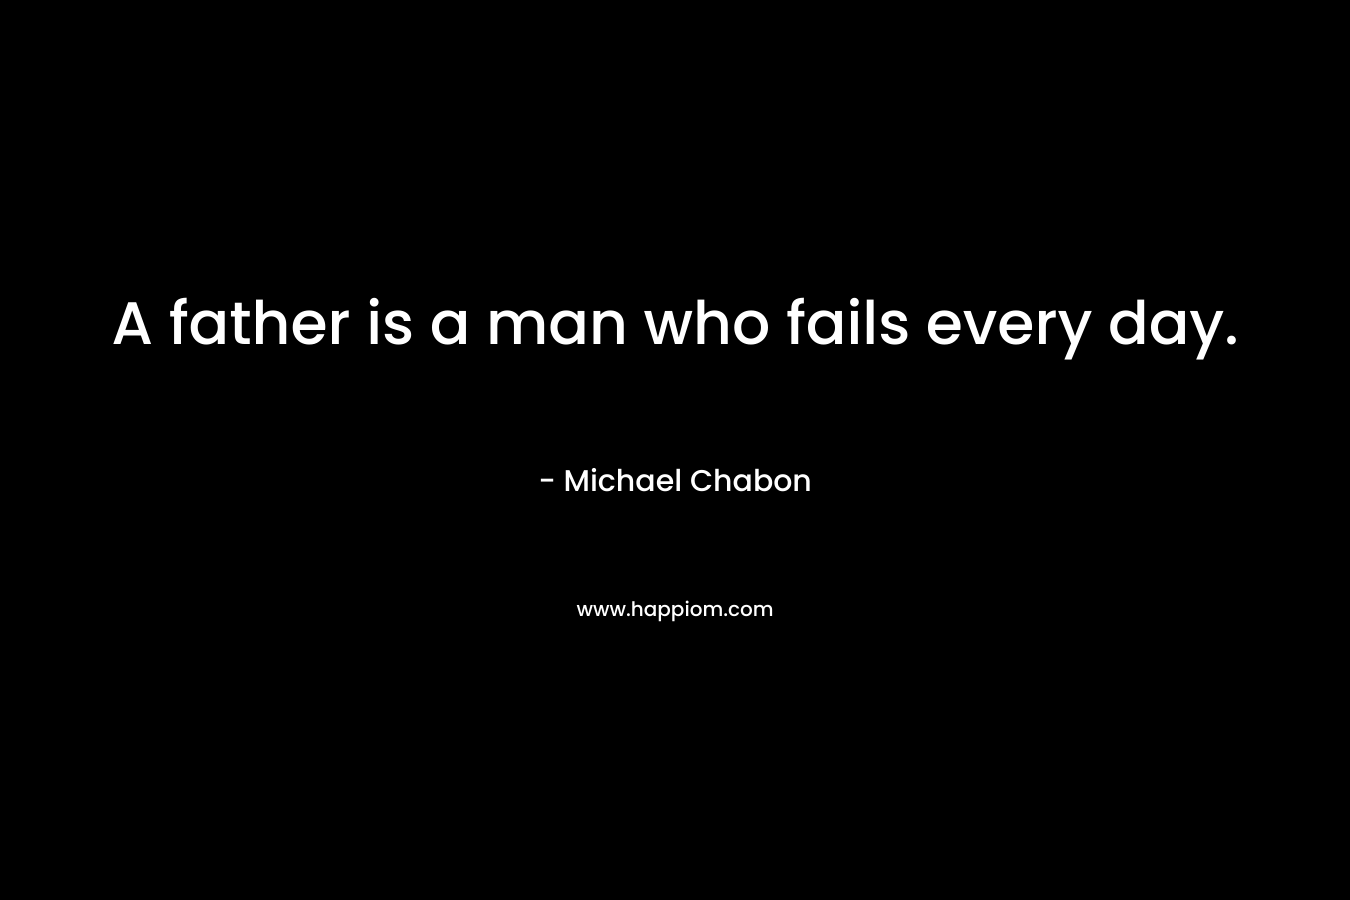 A father is a man who fails every day. – Michael Chabon